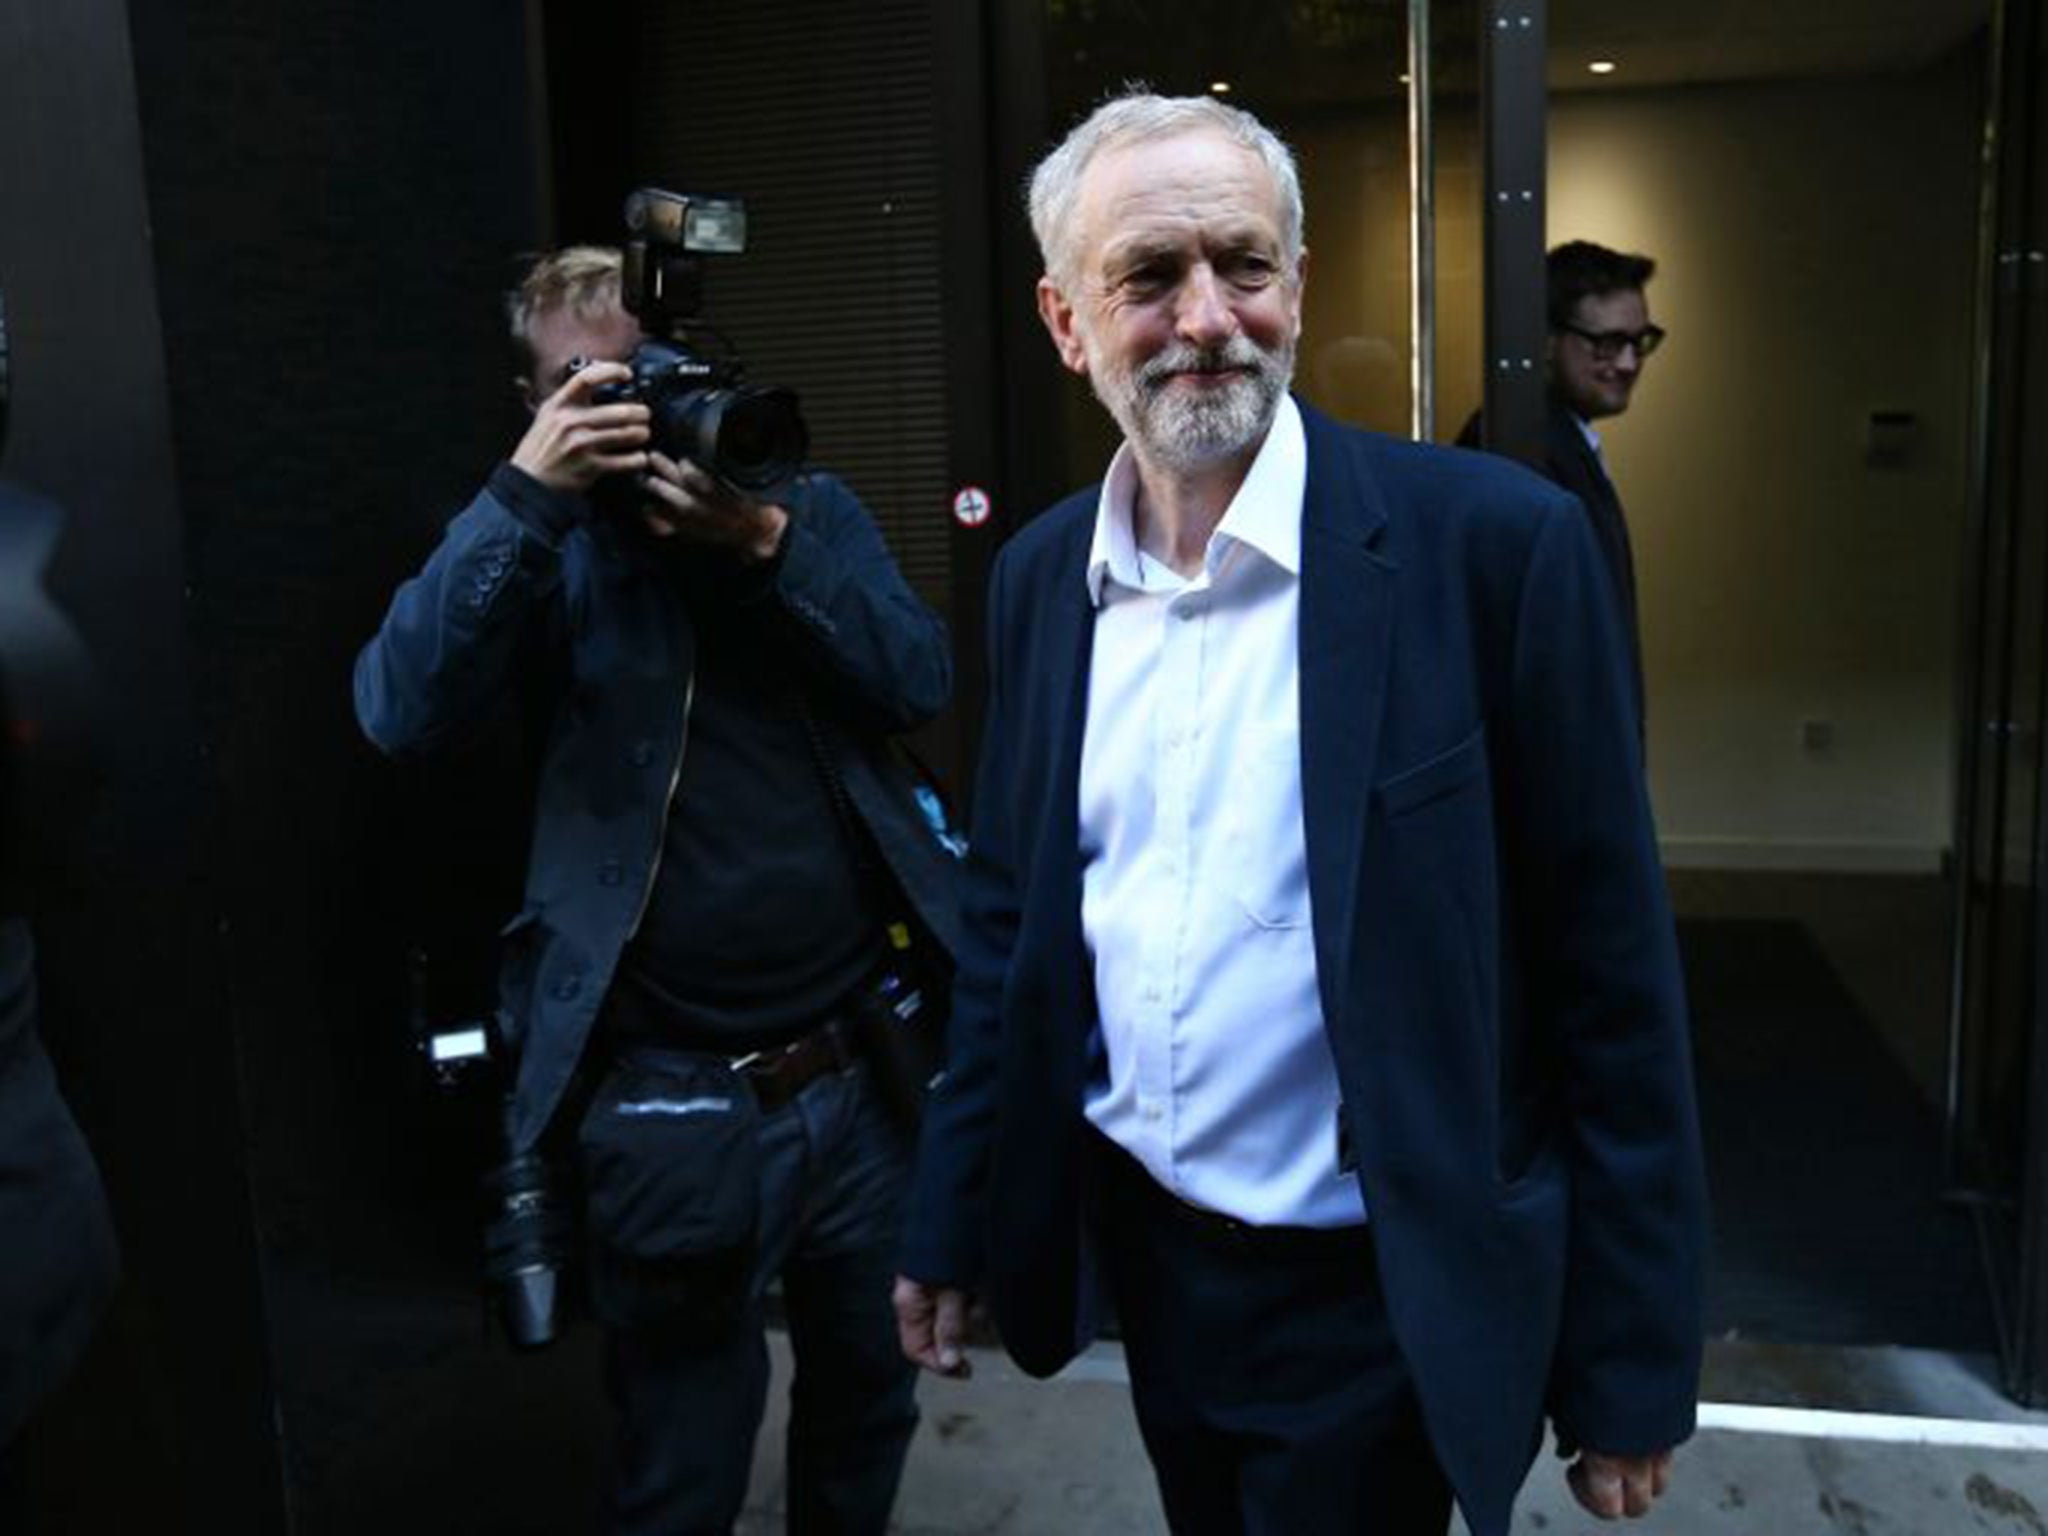 Jeremy Corbyn is angry that senior party figures have not backed him